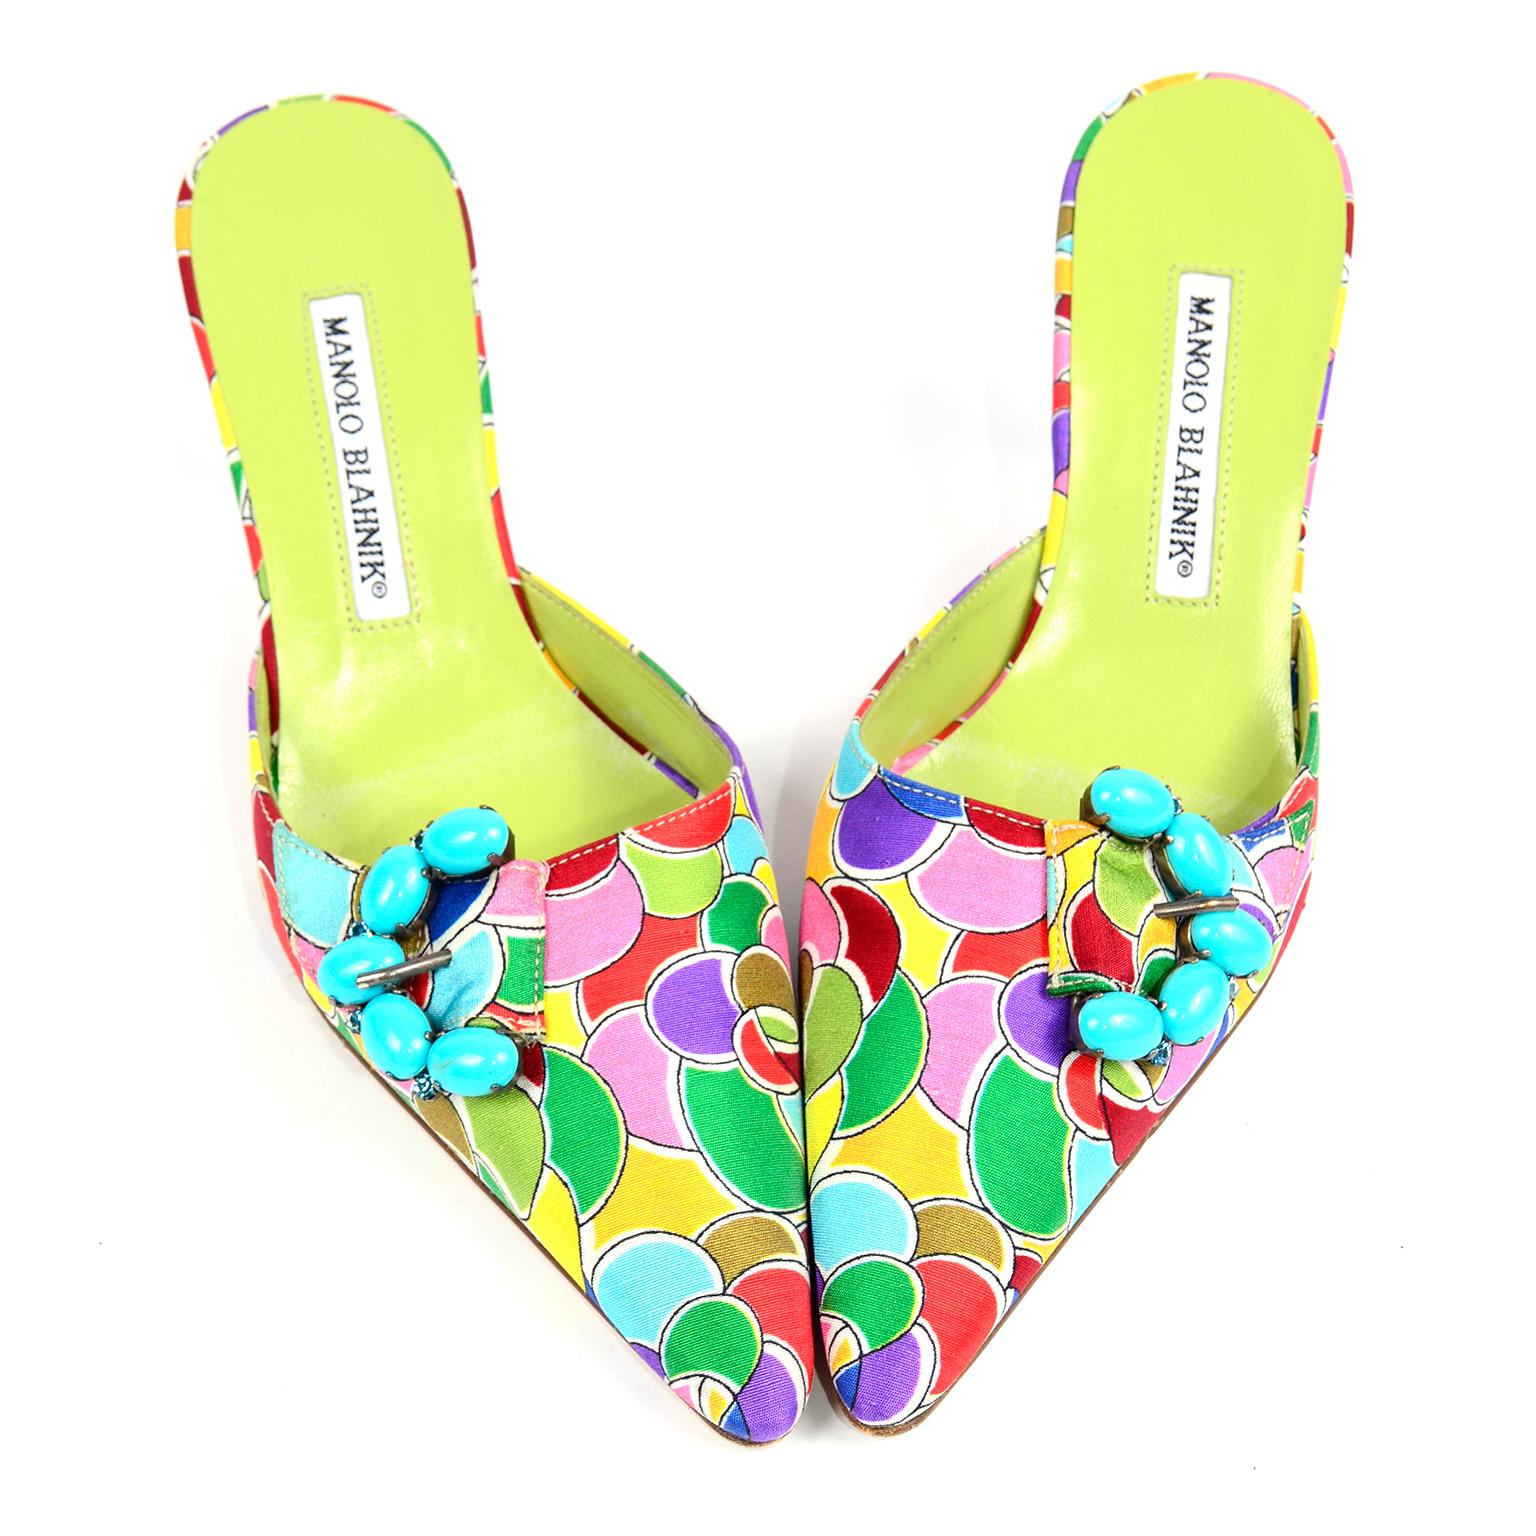 Women's Manolo Blahnik Atomica Colorful Heeled Mules w/ Turquoise Buckle Size 36 1/2 For Sale